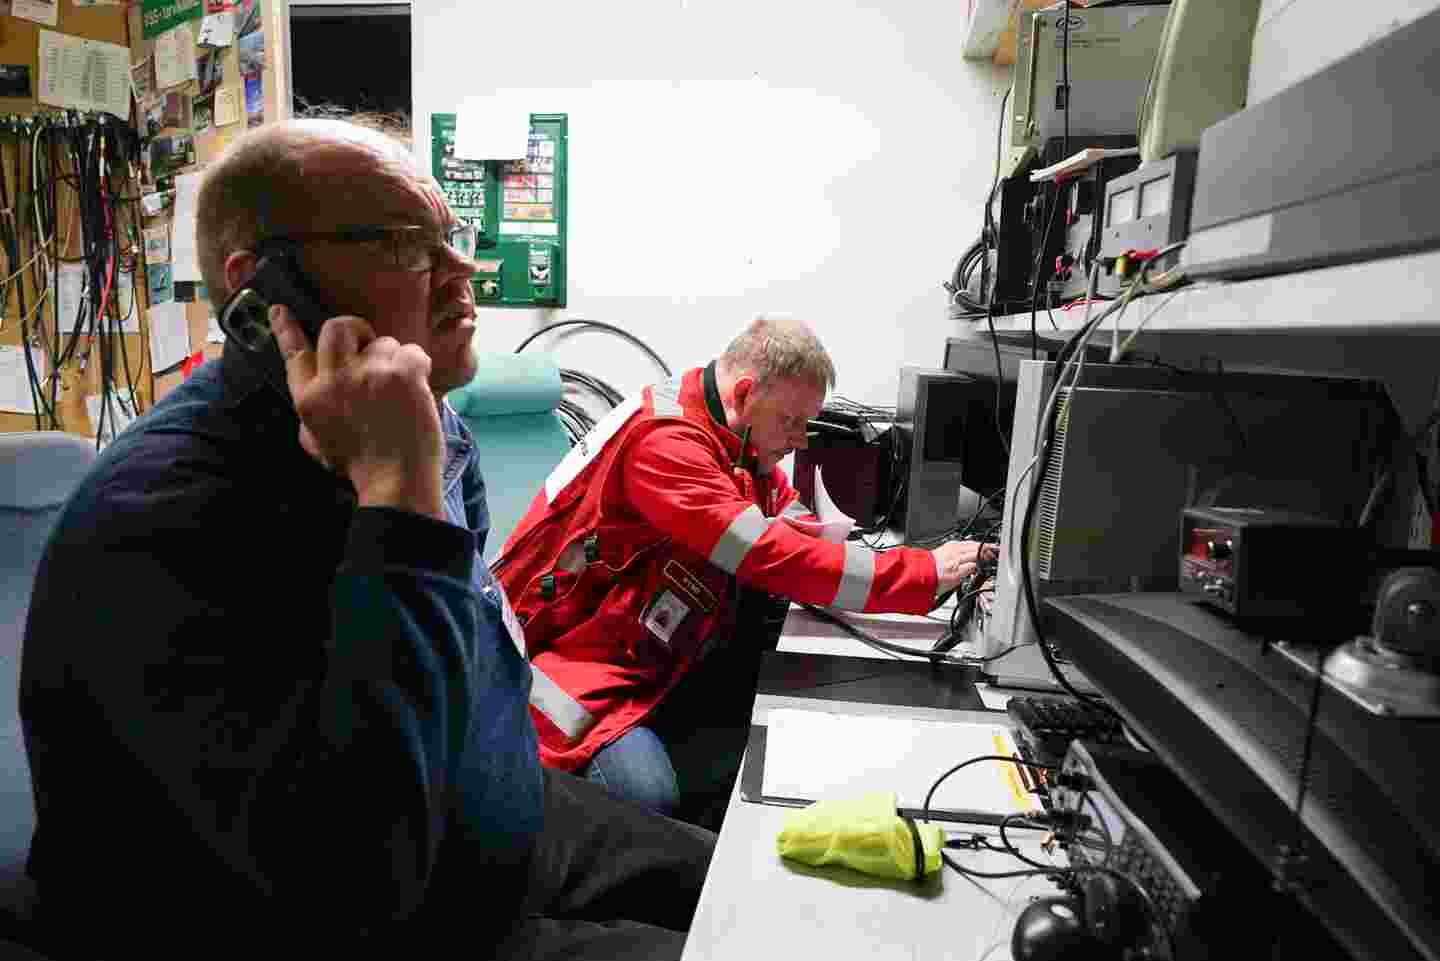 Volunteers of the Red Cross and the Voluntary Rescue Service in a technical room, surrounded by different devices. One of the volunteers is speaking on the phone.